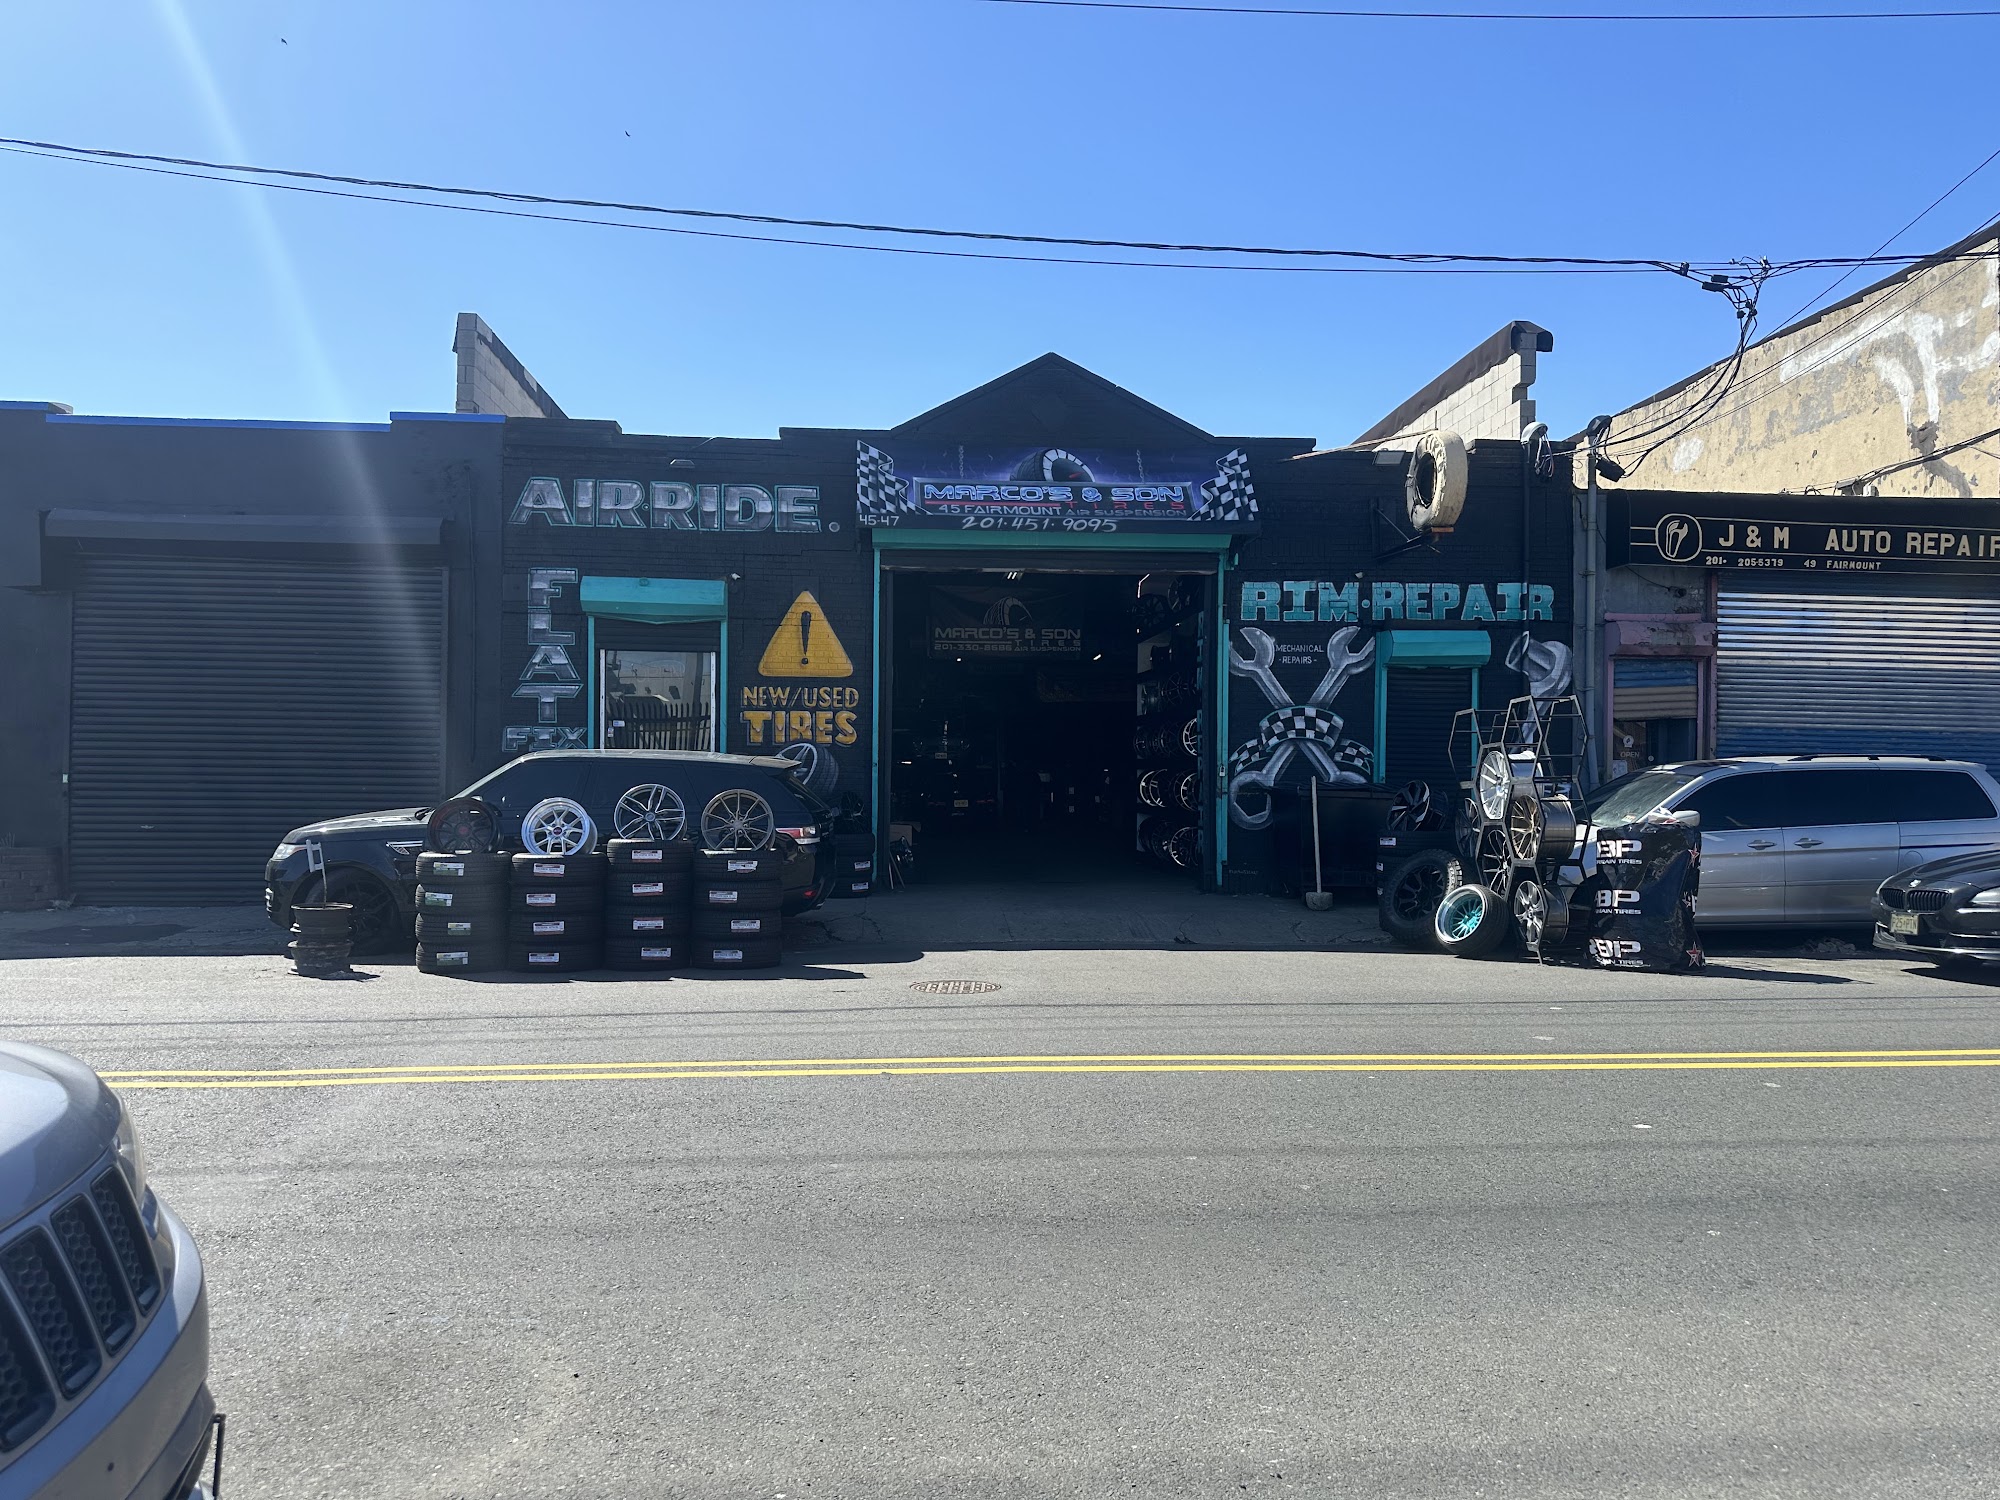 Marco's and son tires